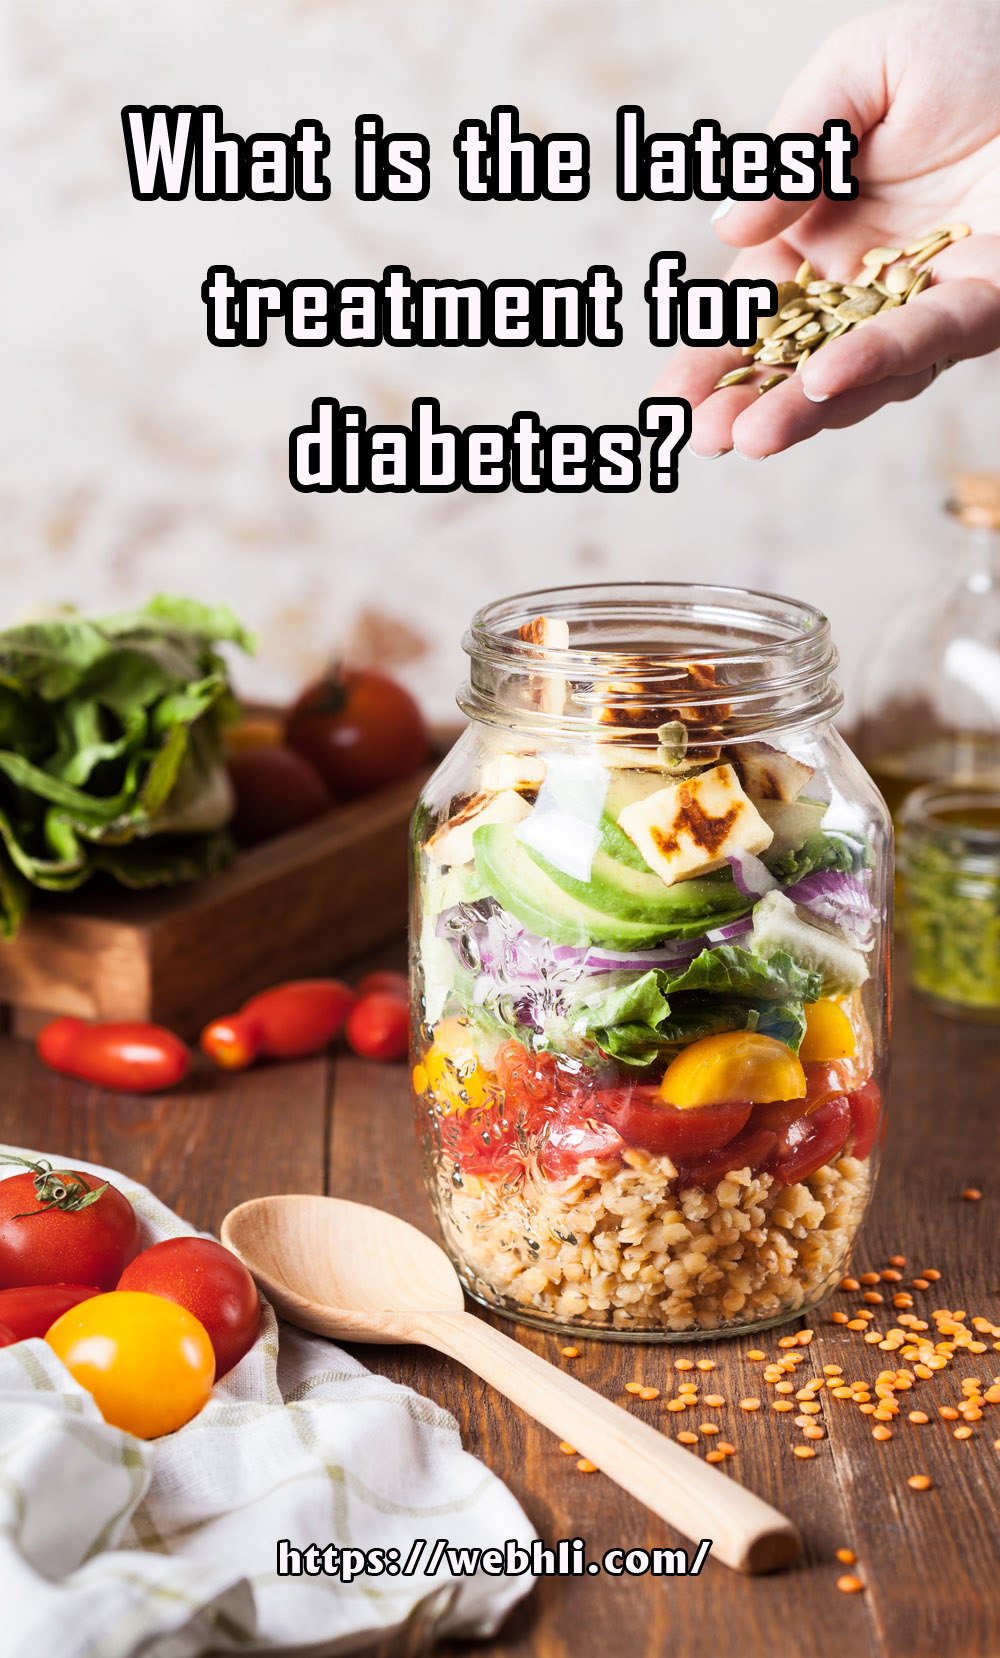 What is the latest treatment for diabetes? | Healthy Lifestyle